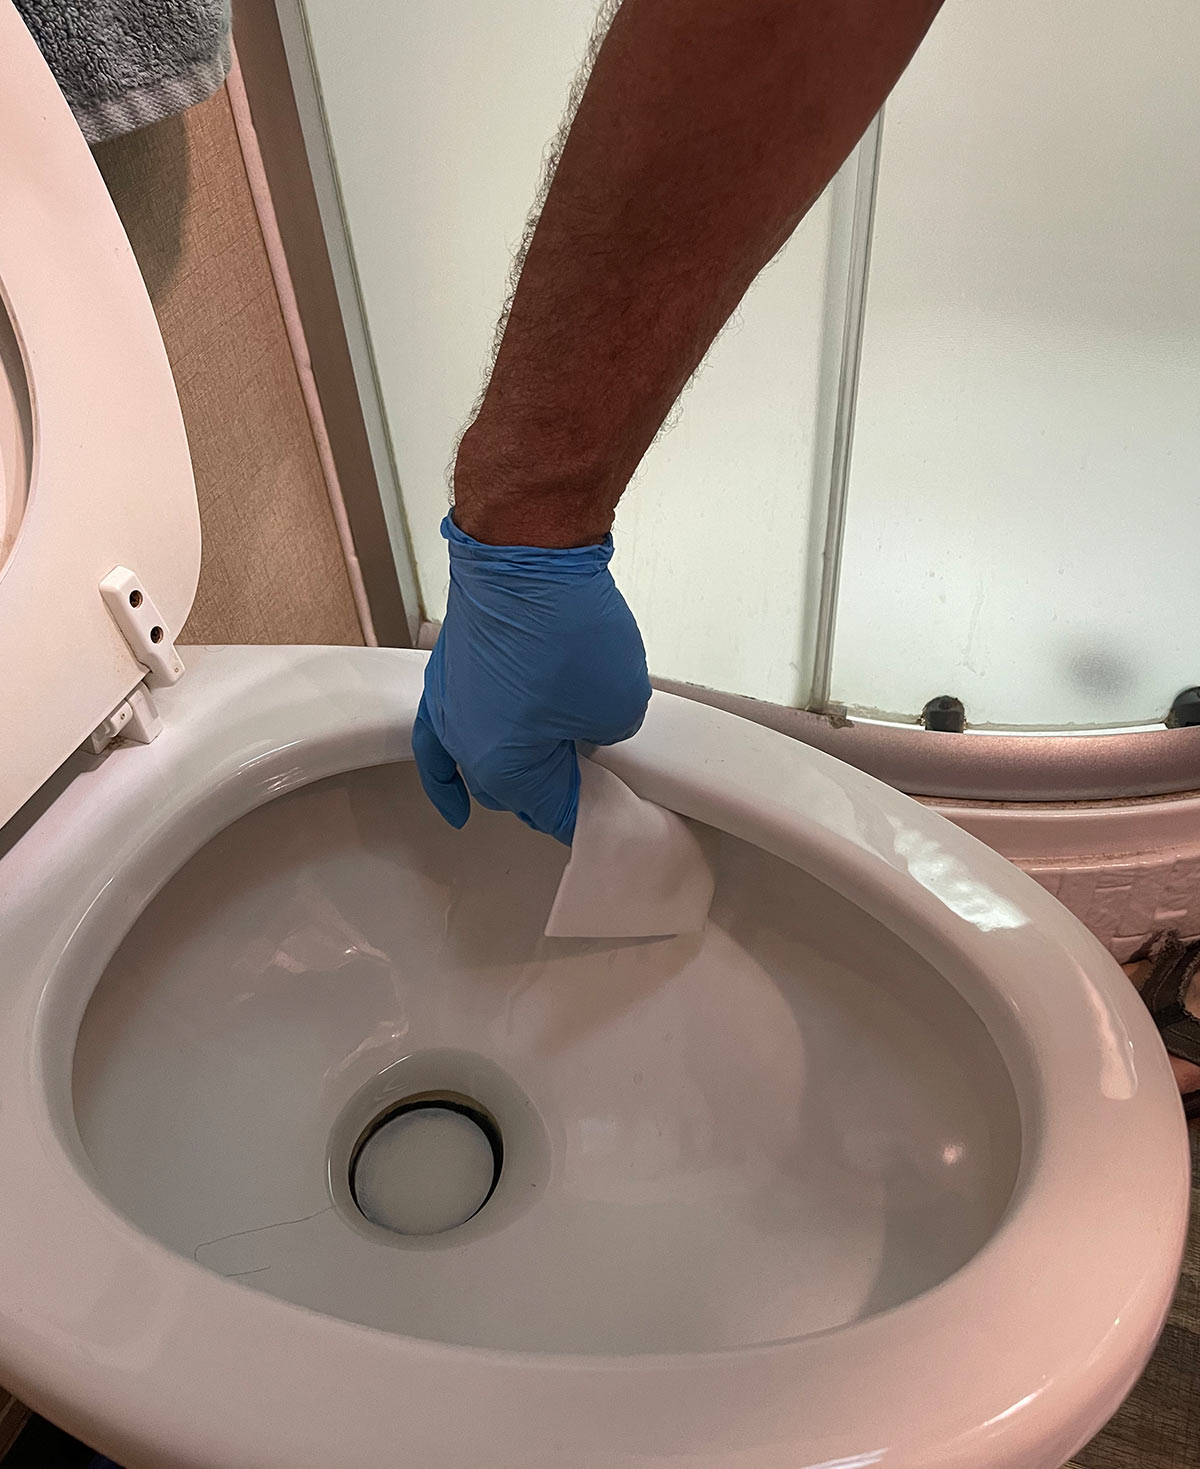 wiping the inside of the toilet